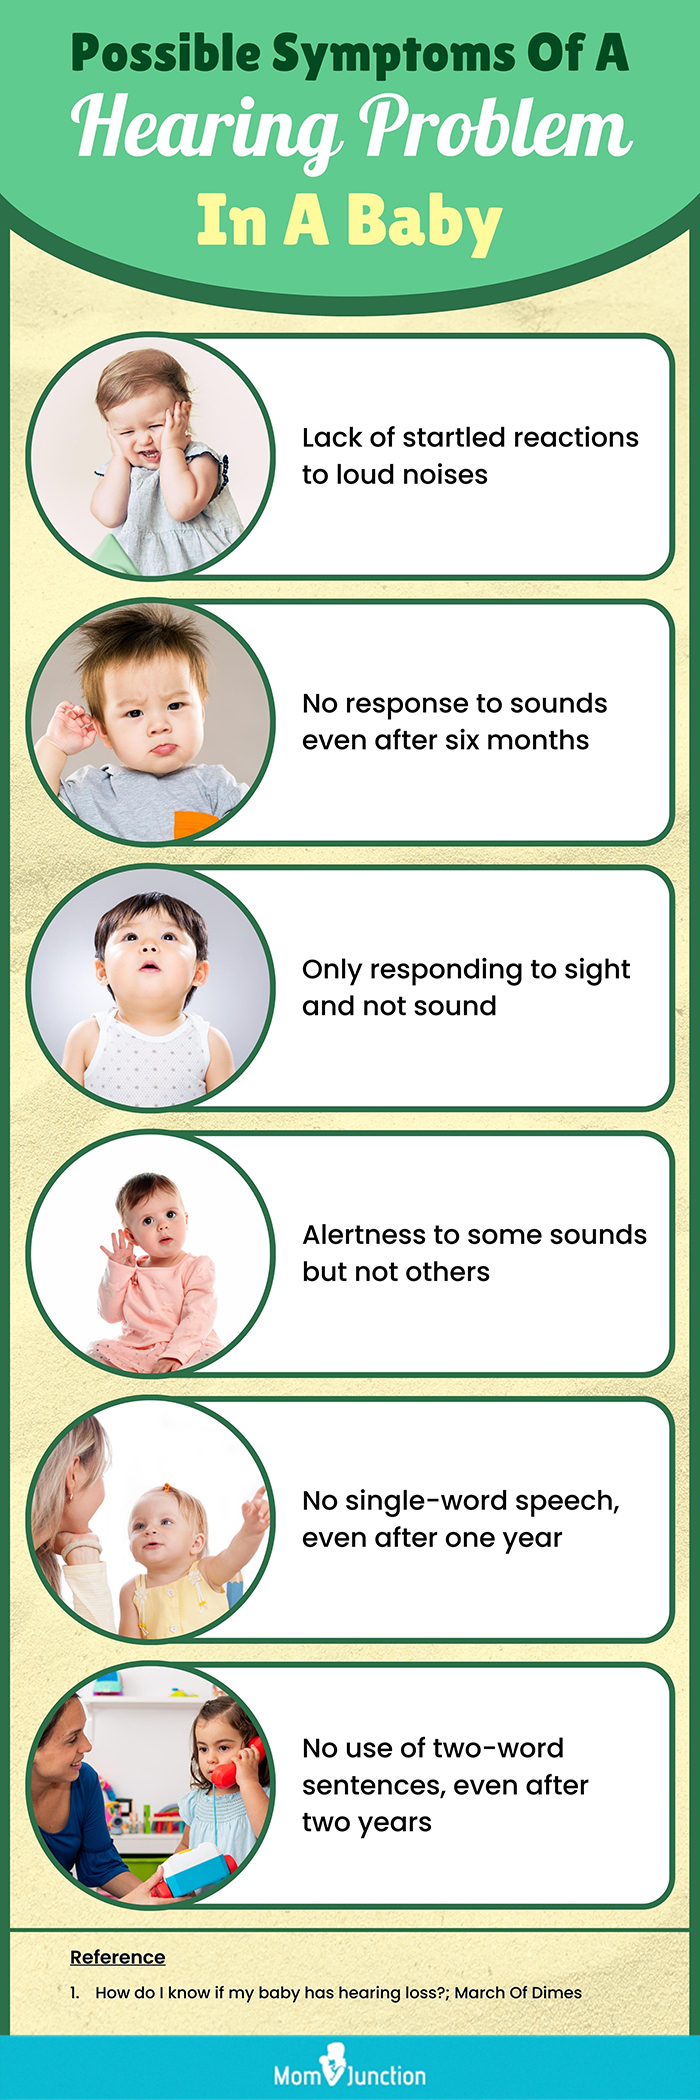 possible symptoms of a hearing problem in a baby (infographic)